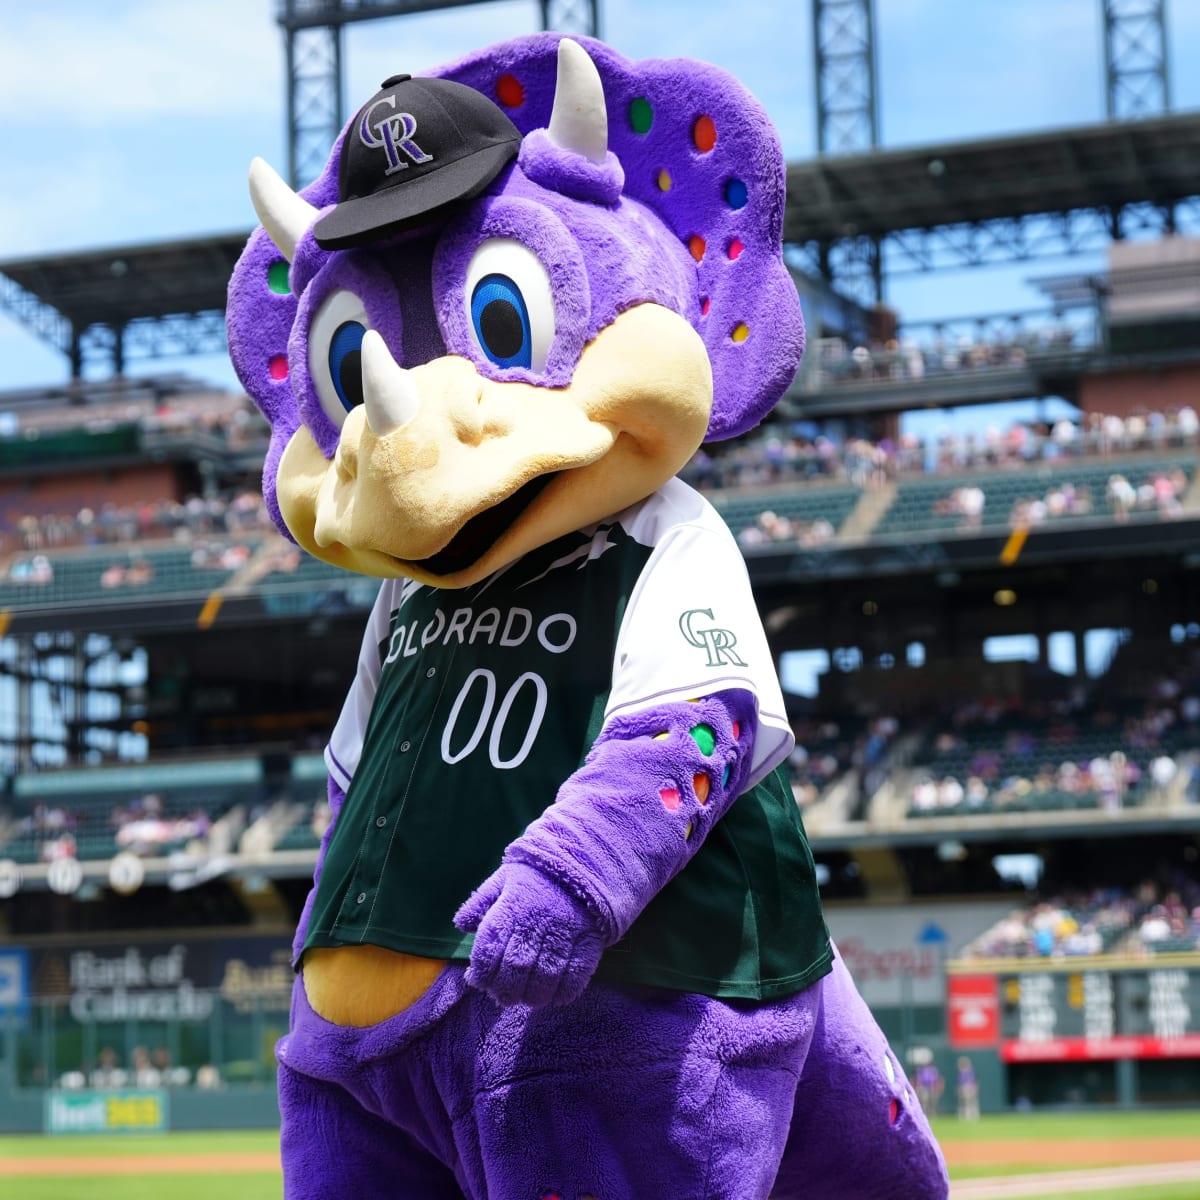 Colorado Rockies: The bullpen isn't the only issue